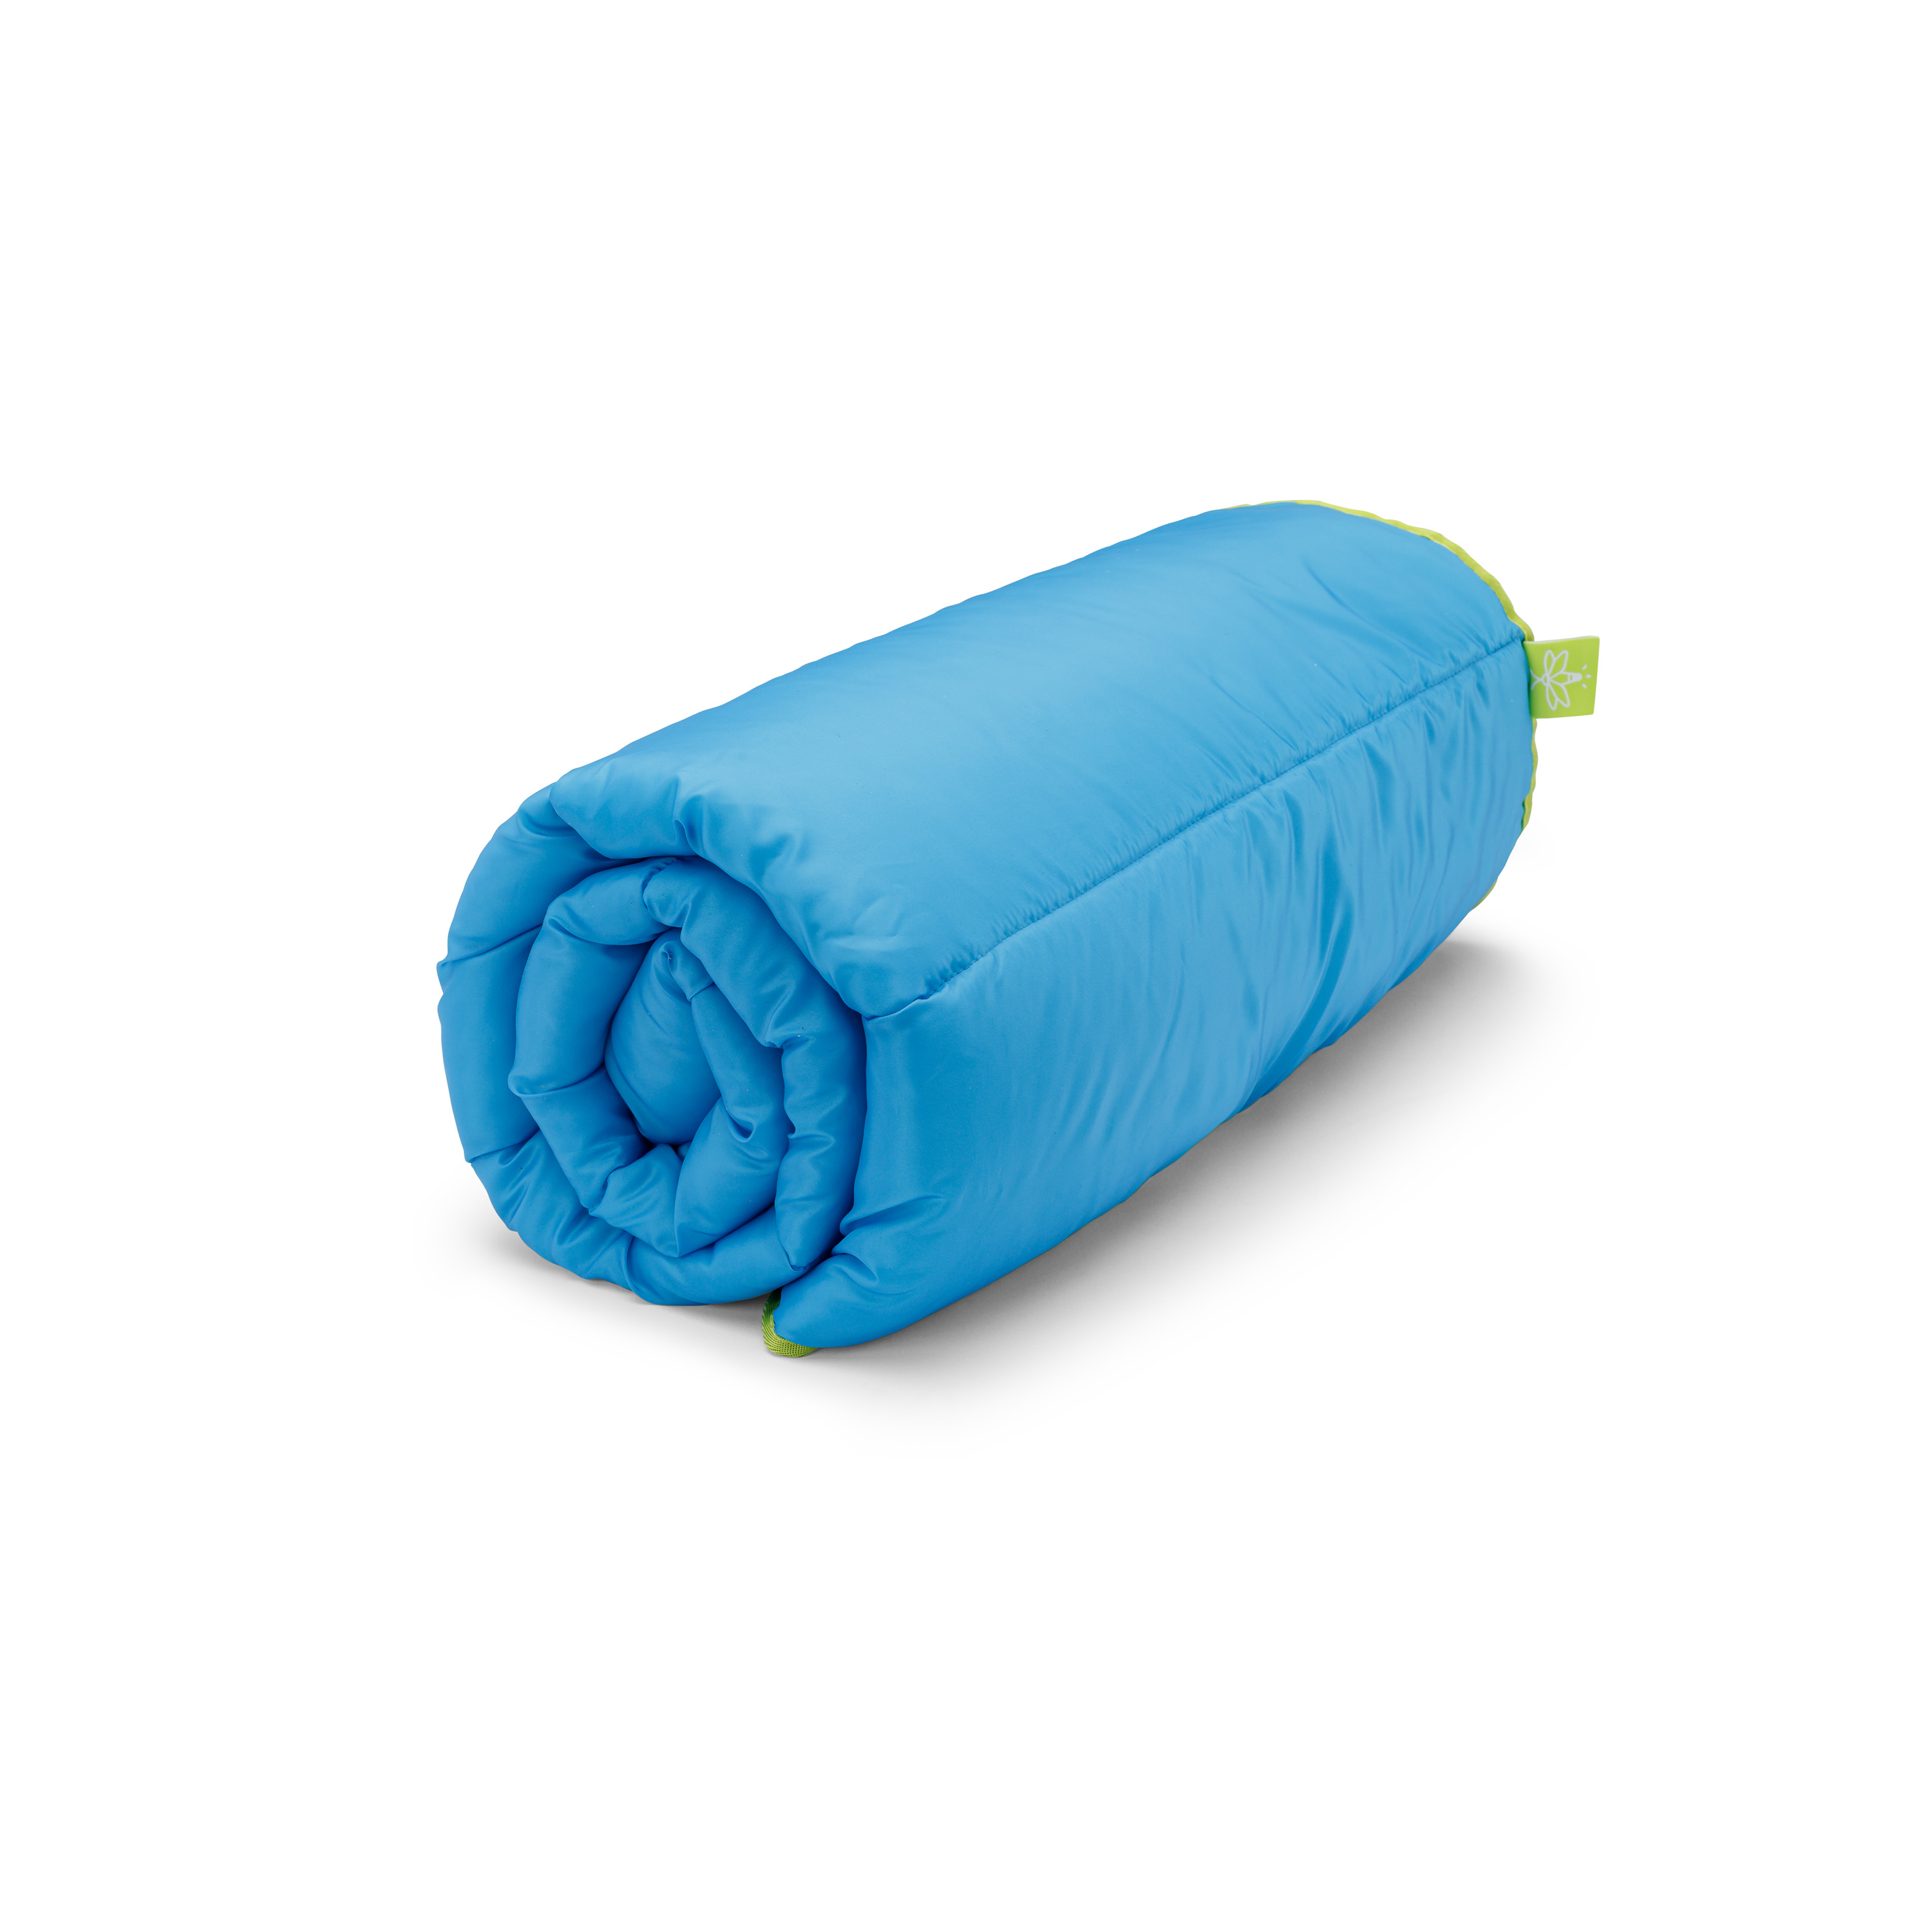 Firefly! Outdoor Gear Rectangular Youth Camp Blanket - Blue (60 in. x 40 in.) - image 5 of 15